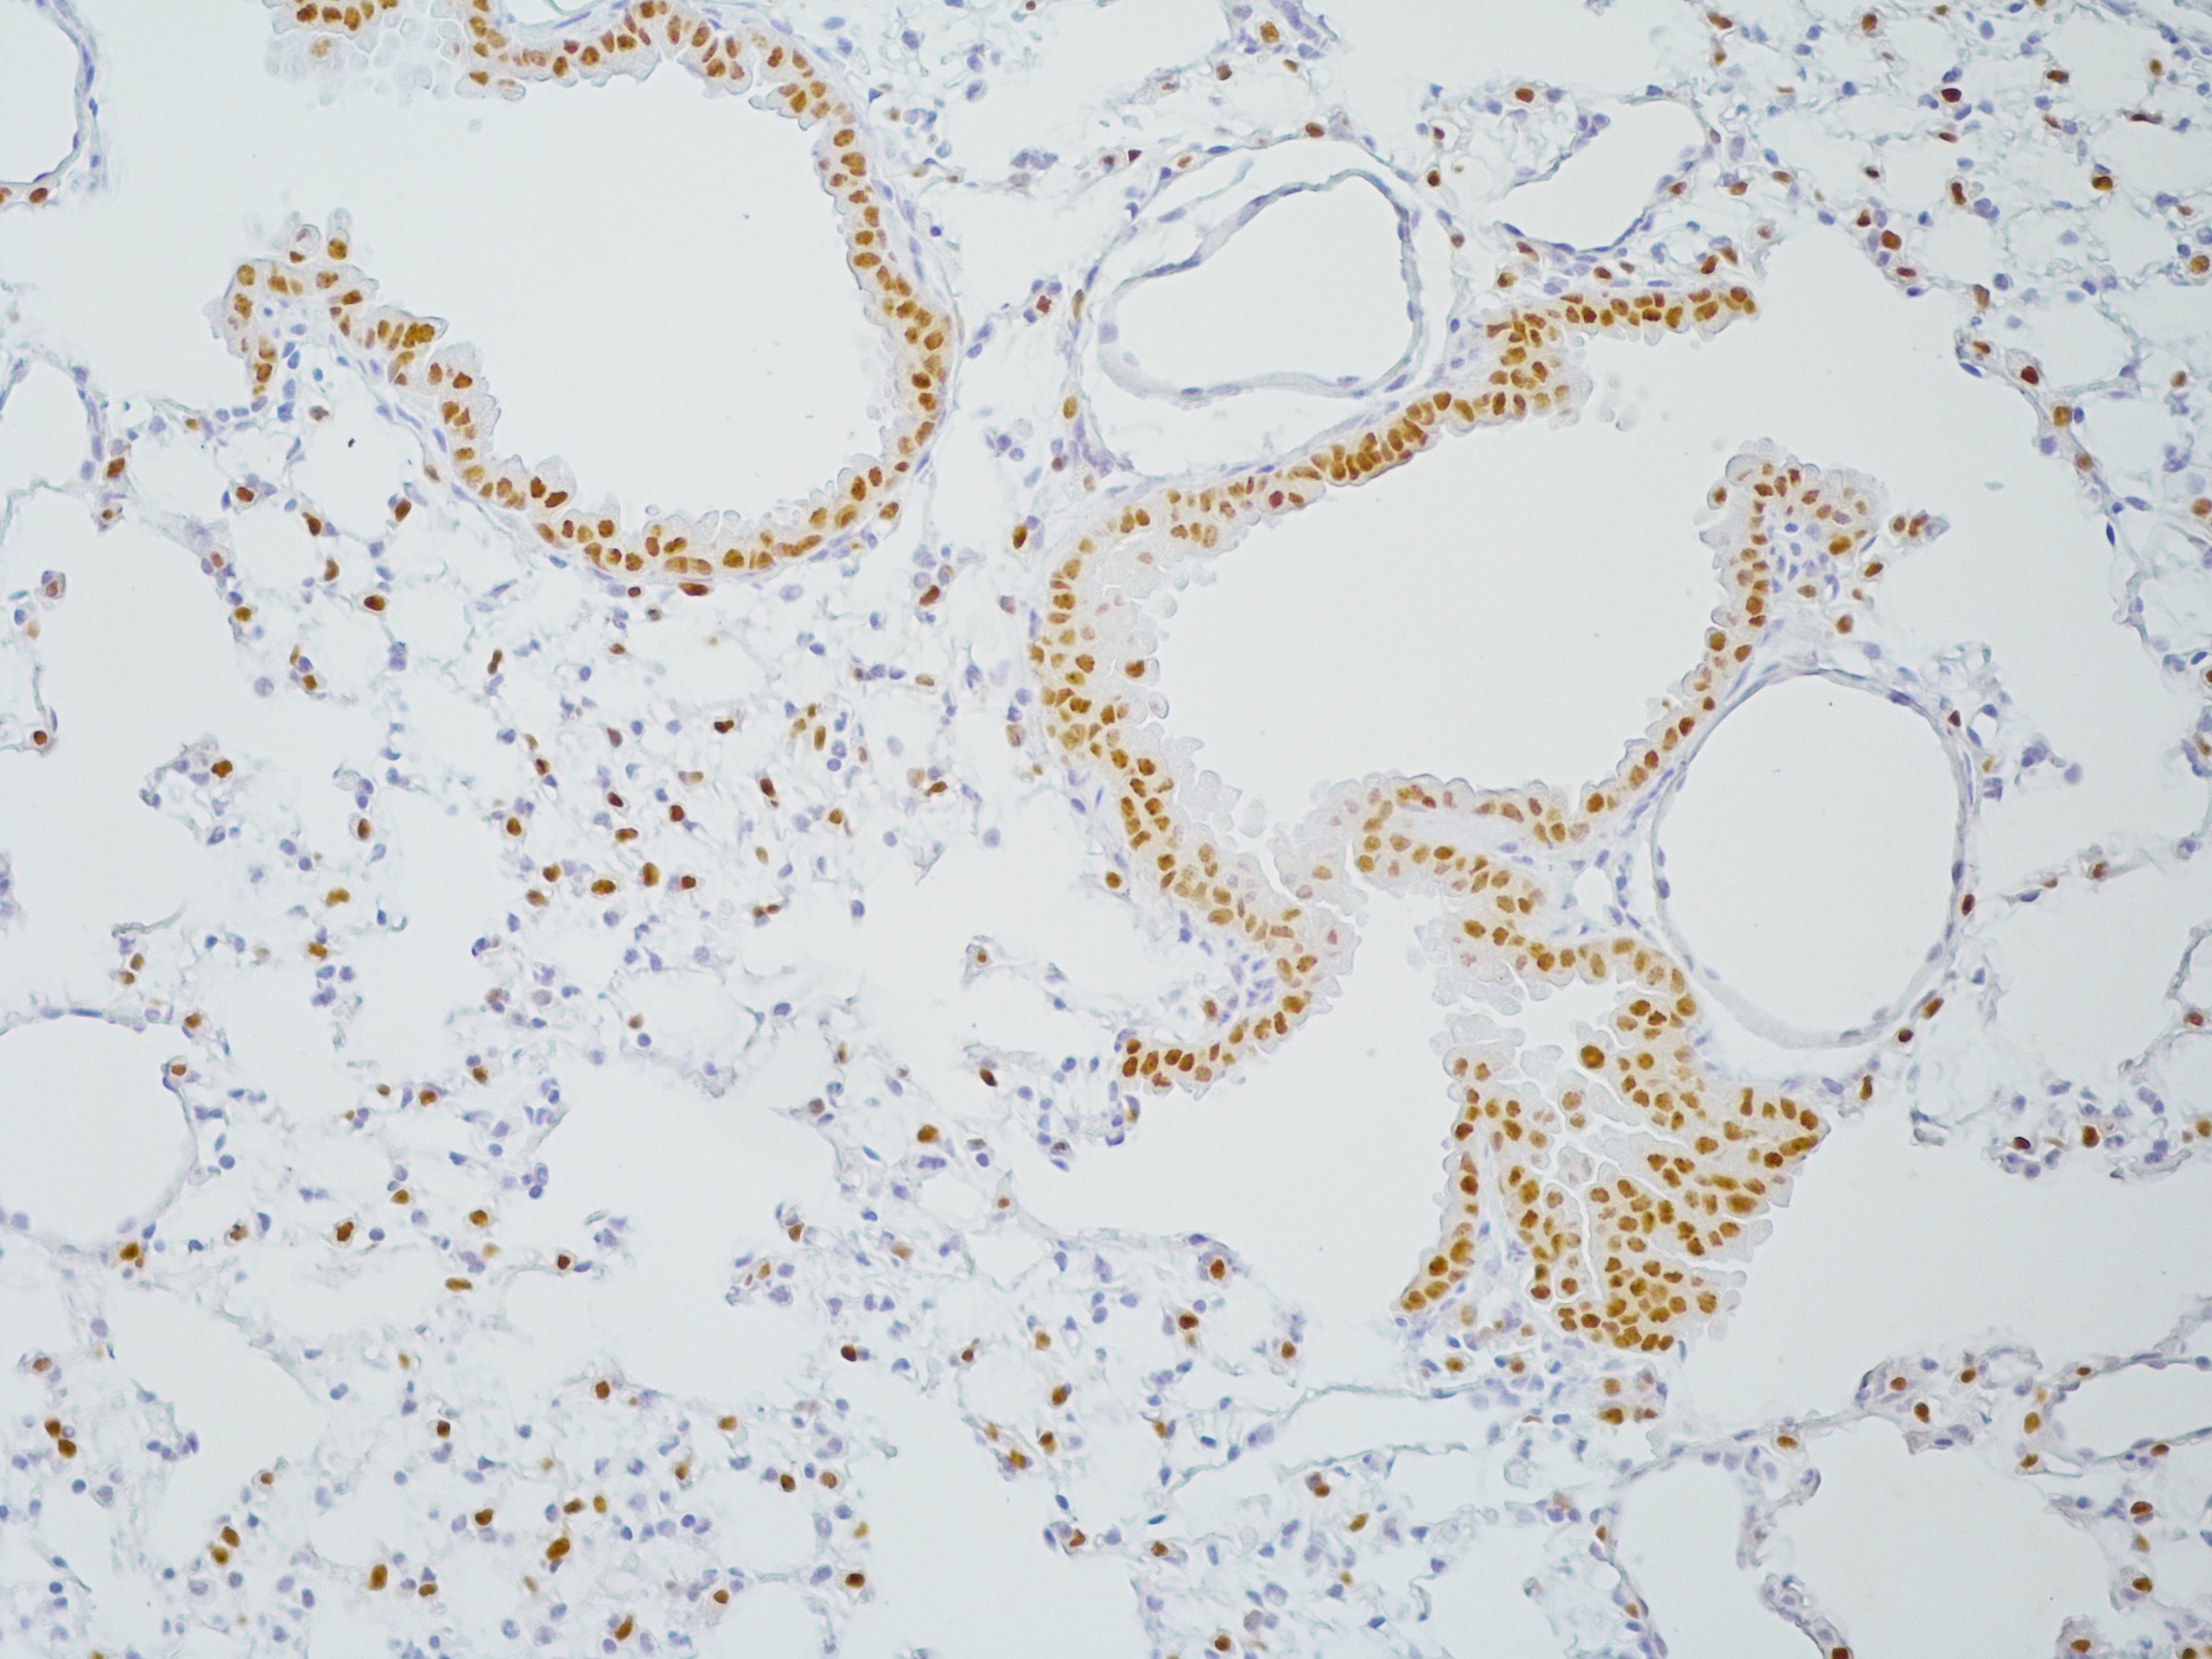 Brightfield microscopy image of lung cancer tissue with immunohistochemistry staining for TTF-1